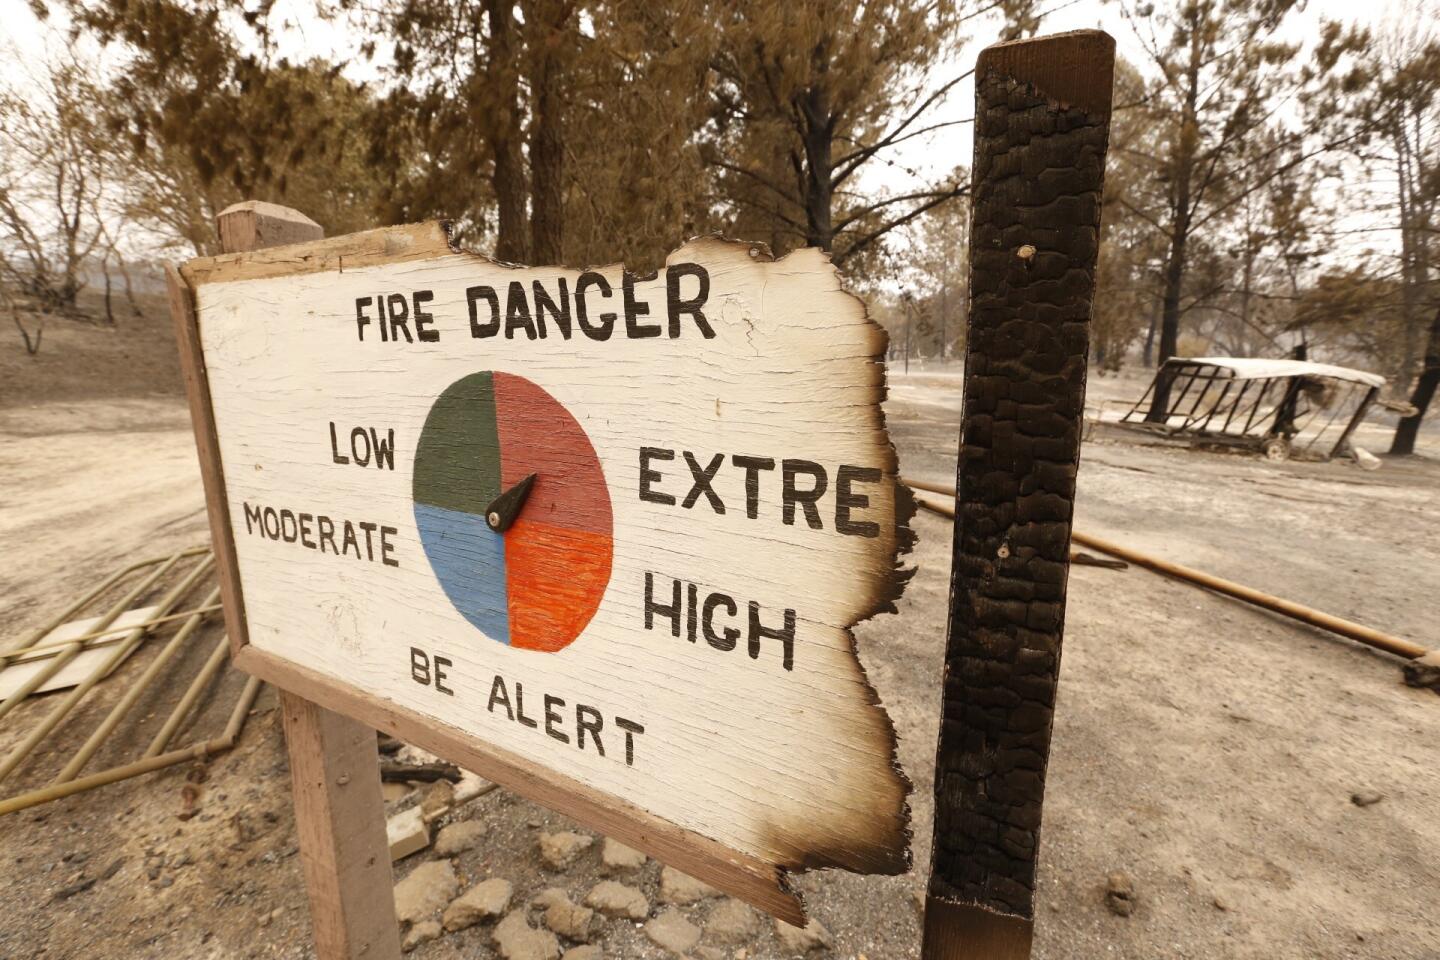 A burned sign warns of fire danger at The Outdoor School at Rancho Alegre Boy Scout camp along State